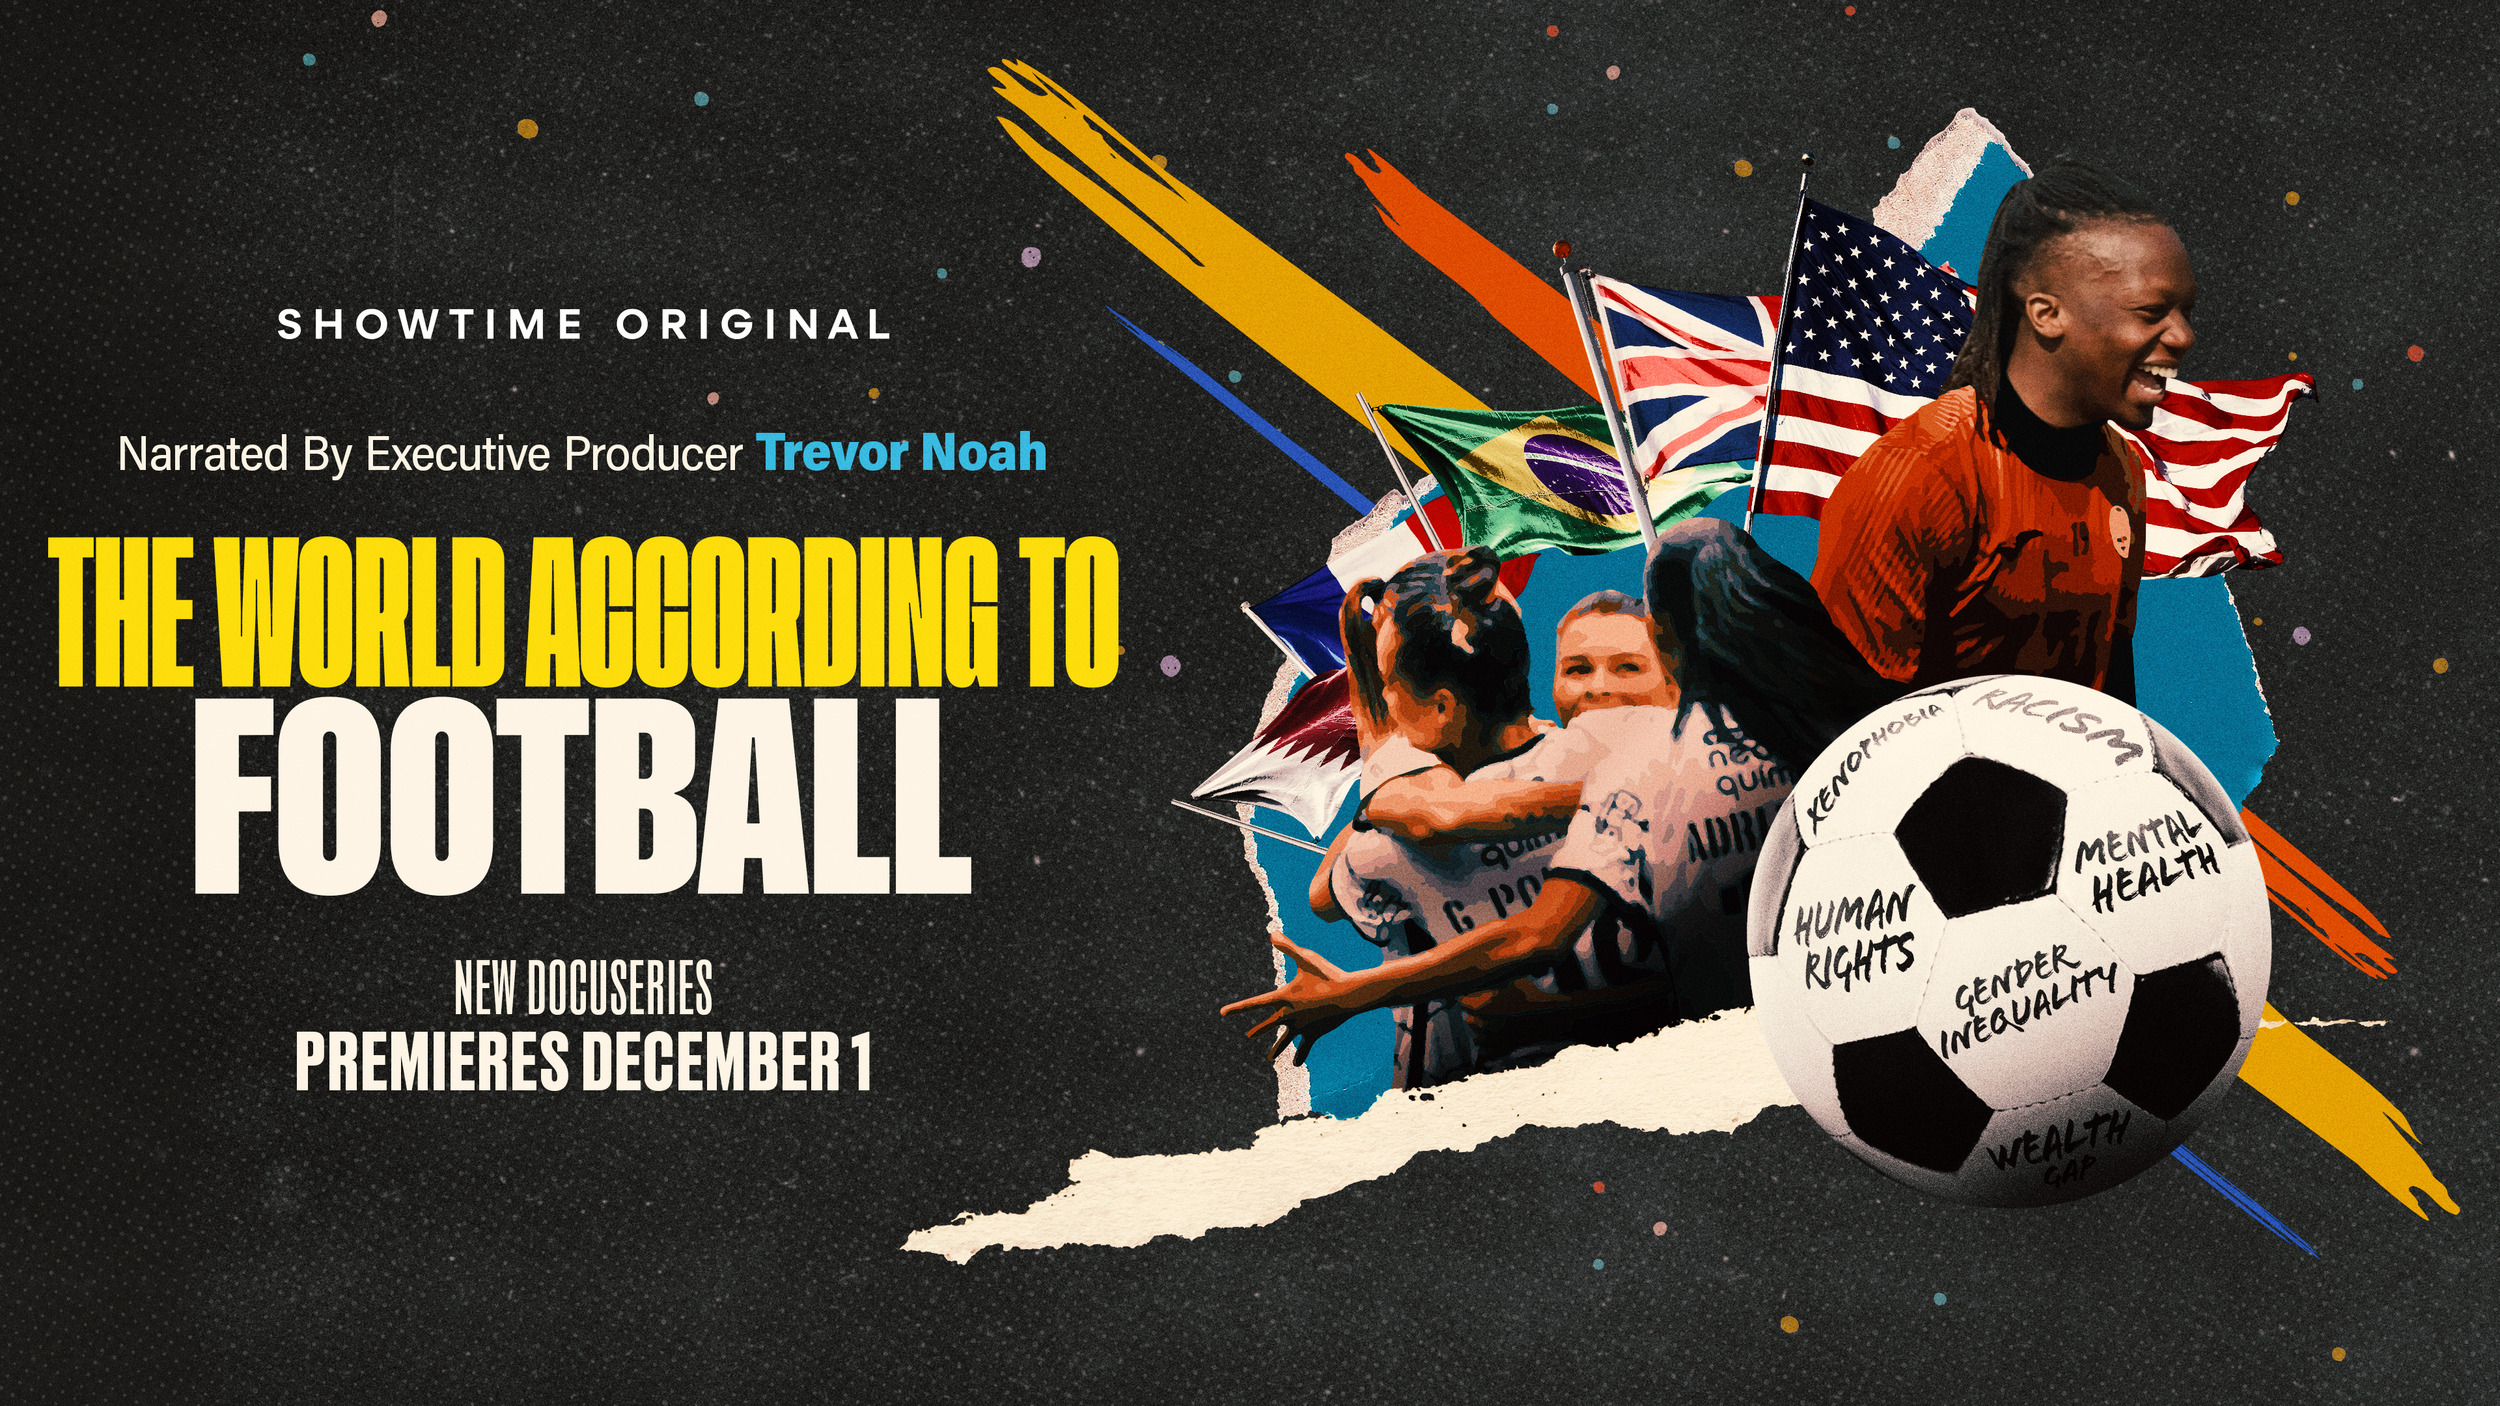 Mega Sized TV Poster Image for The World According to Football 